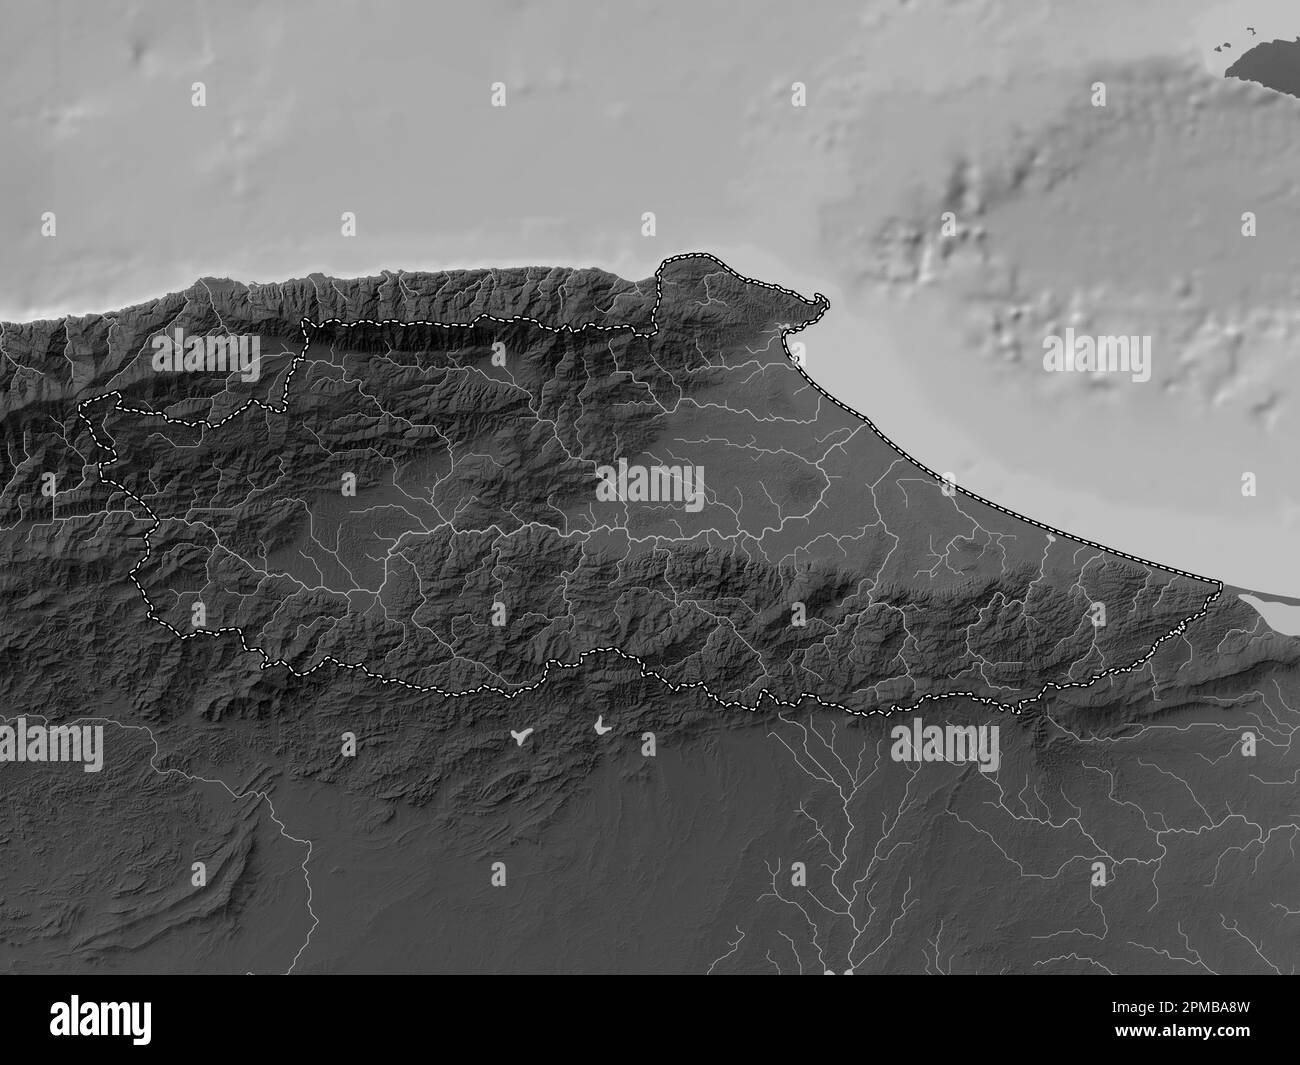 Miranda, state of Venezuela. Grayscale elevation map with lakes and rivers Stock Photo